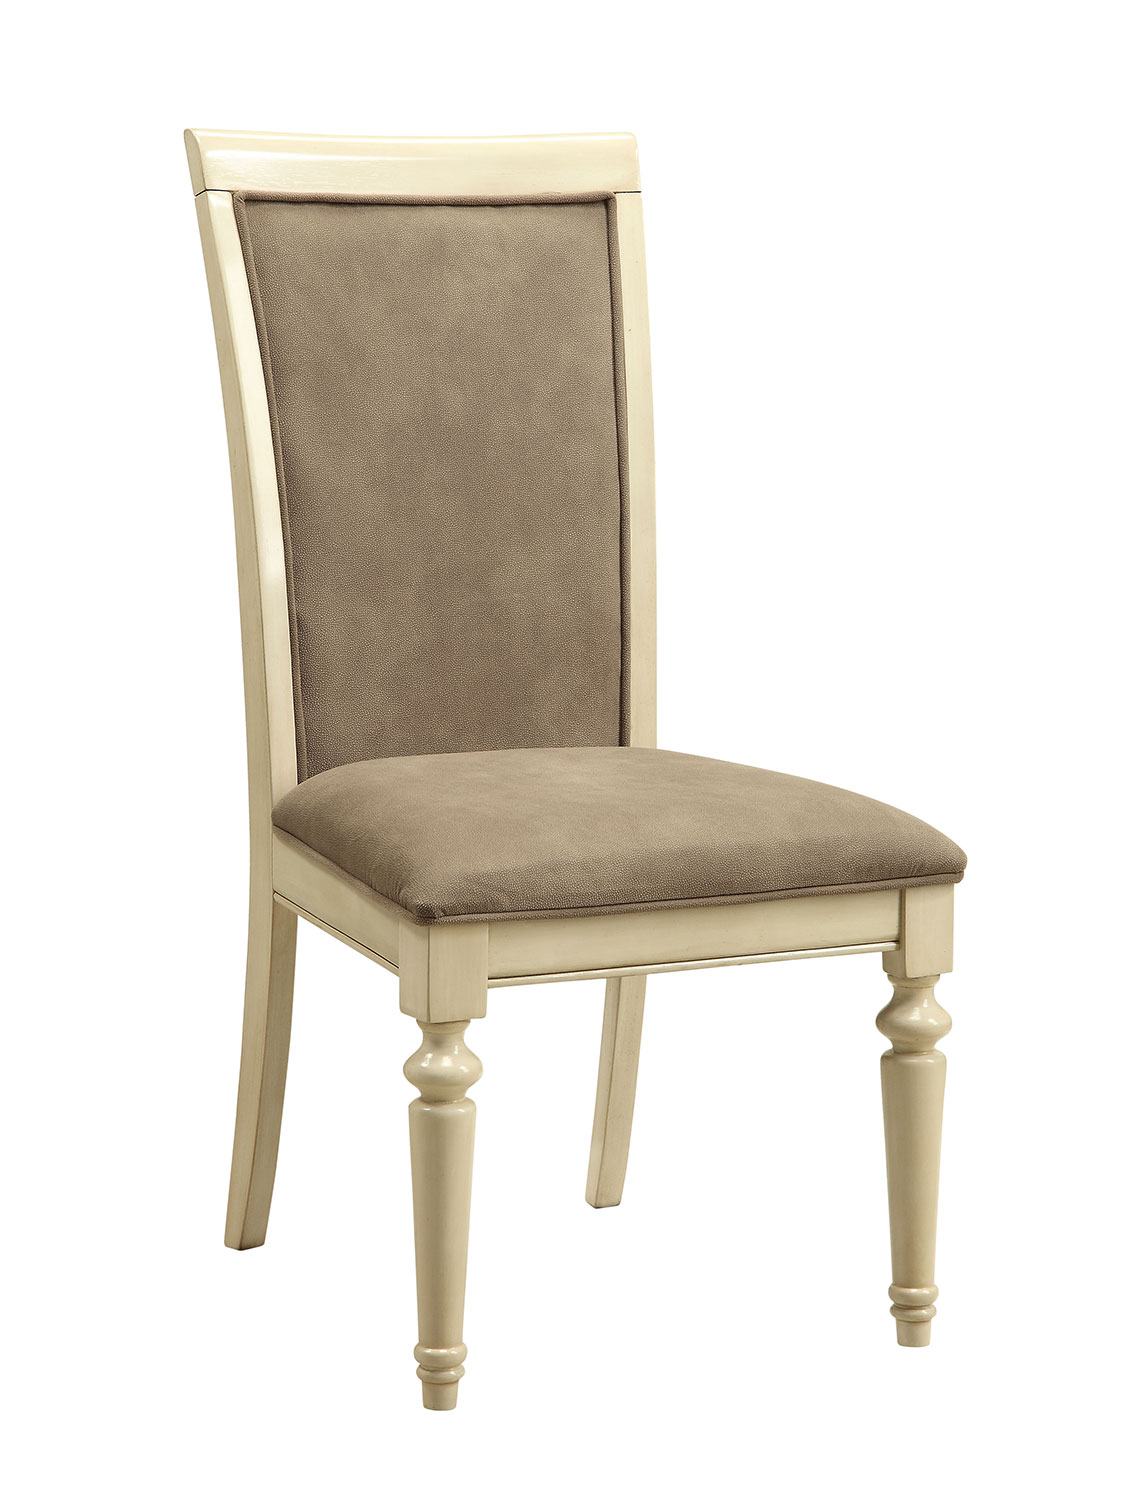 Acme Ryder Side Chair - Fabric/Antique White